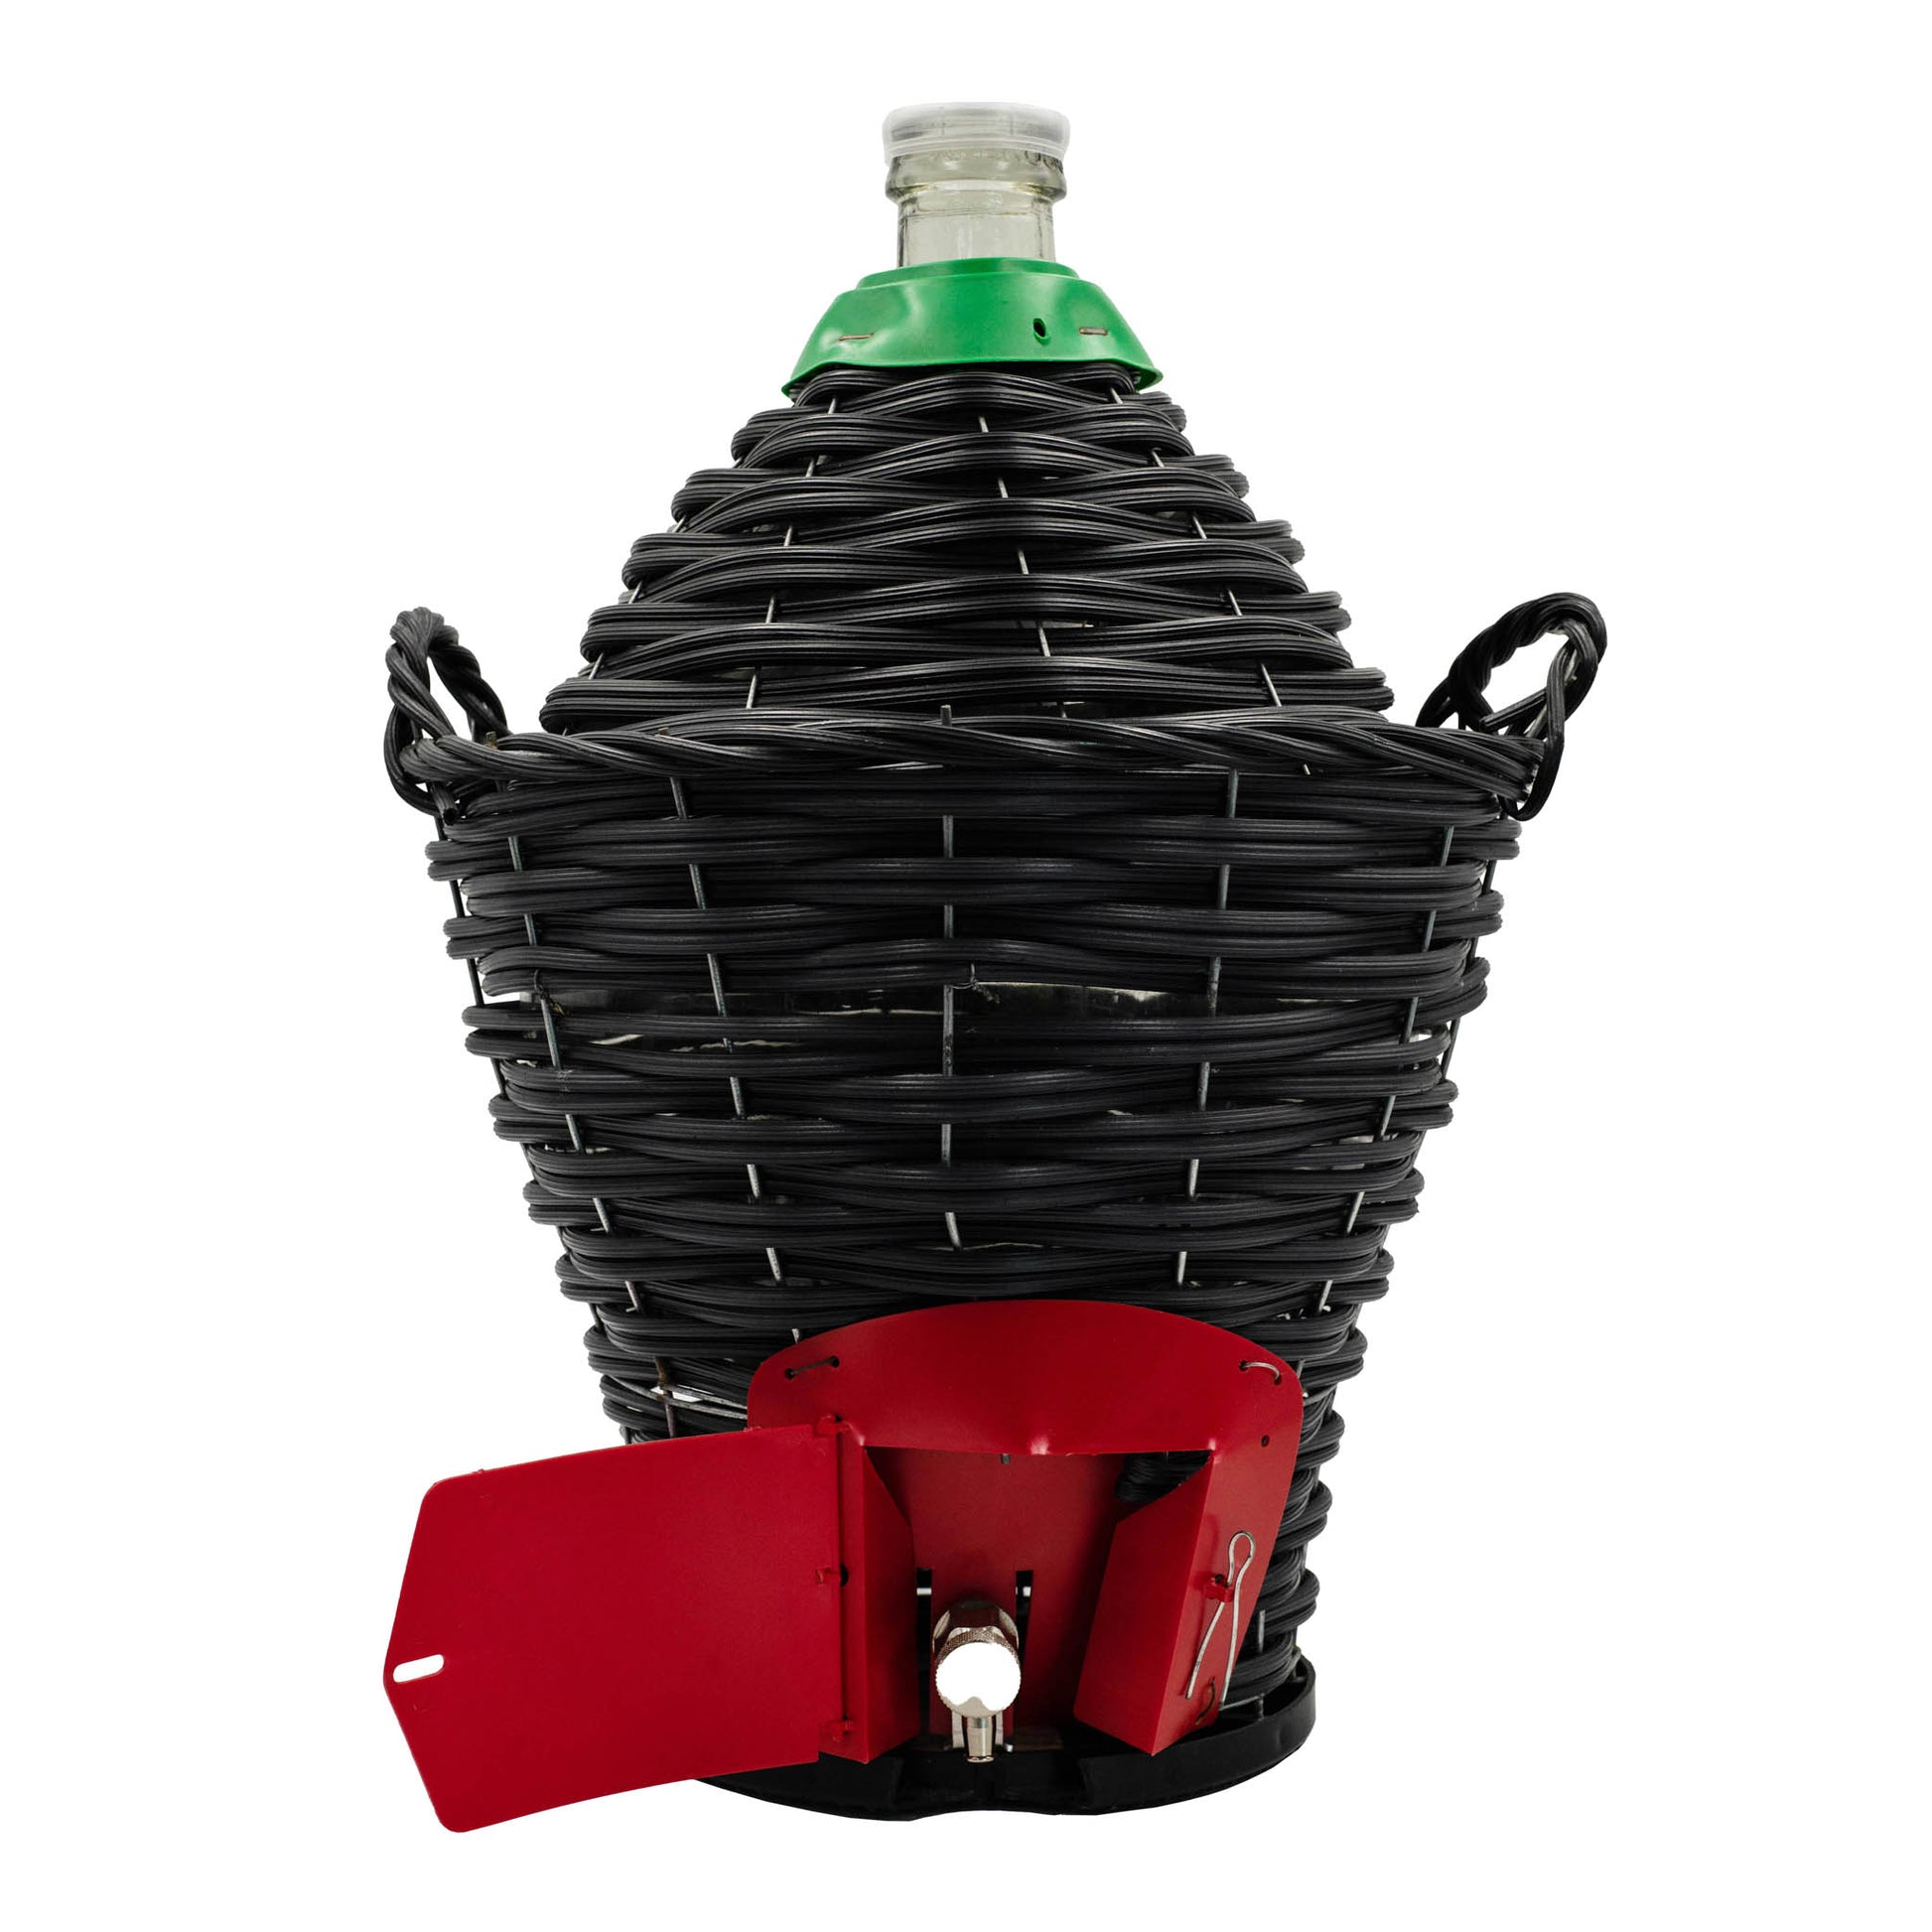 23 litre narrow neck demijohn with heavy weave basket and tap for storing and fermenting wine.